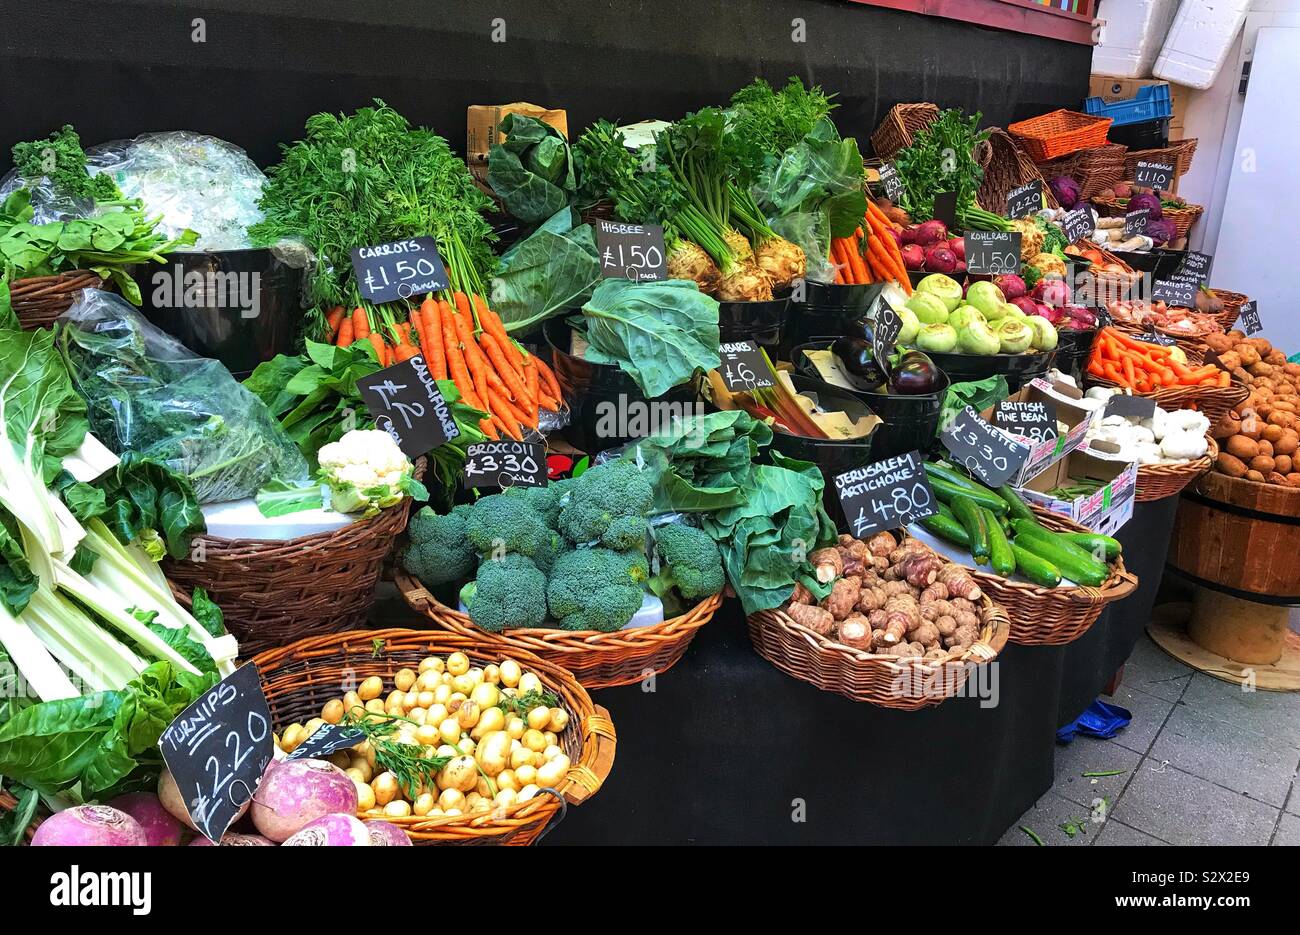 Display Of Different Vegetables On Market Stall At Borough Market - London UK Stock Photo